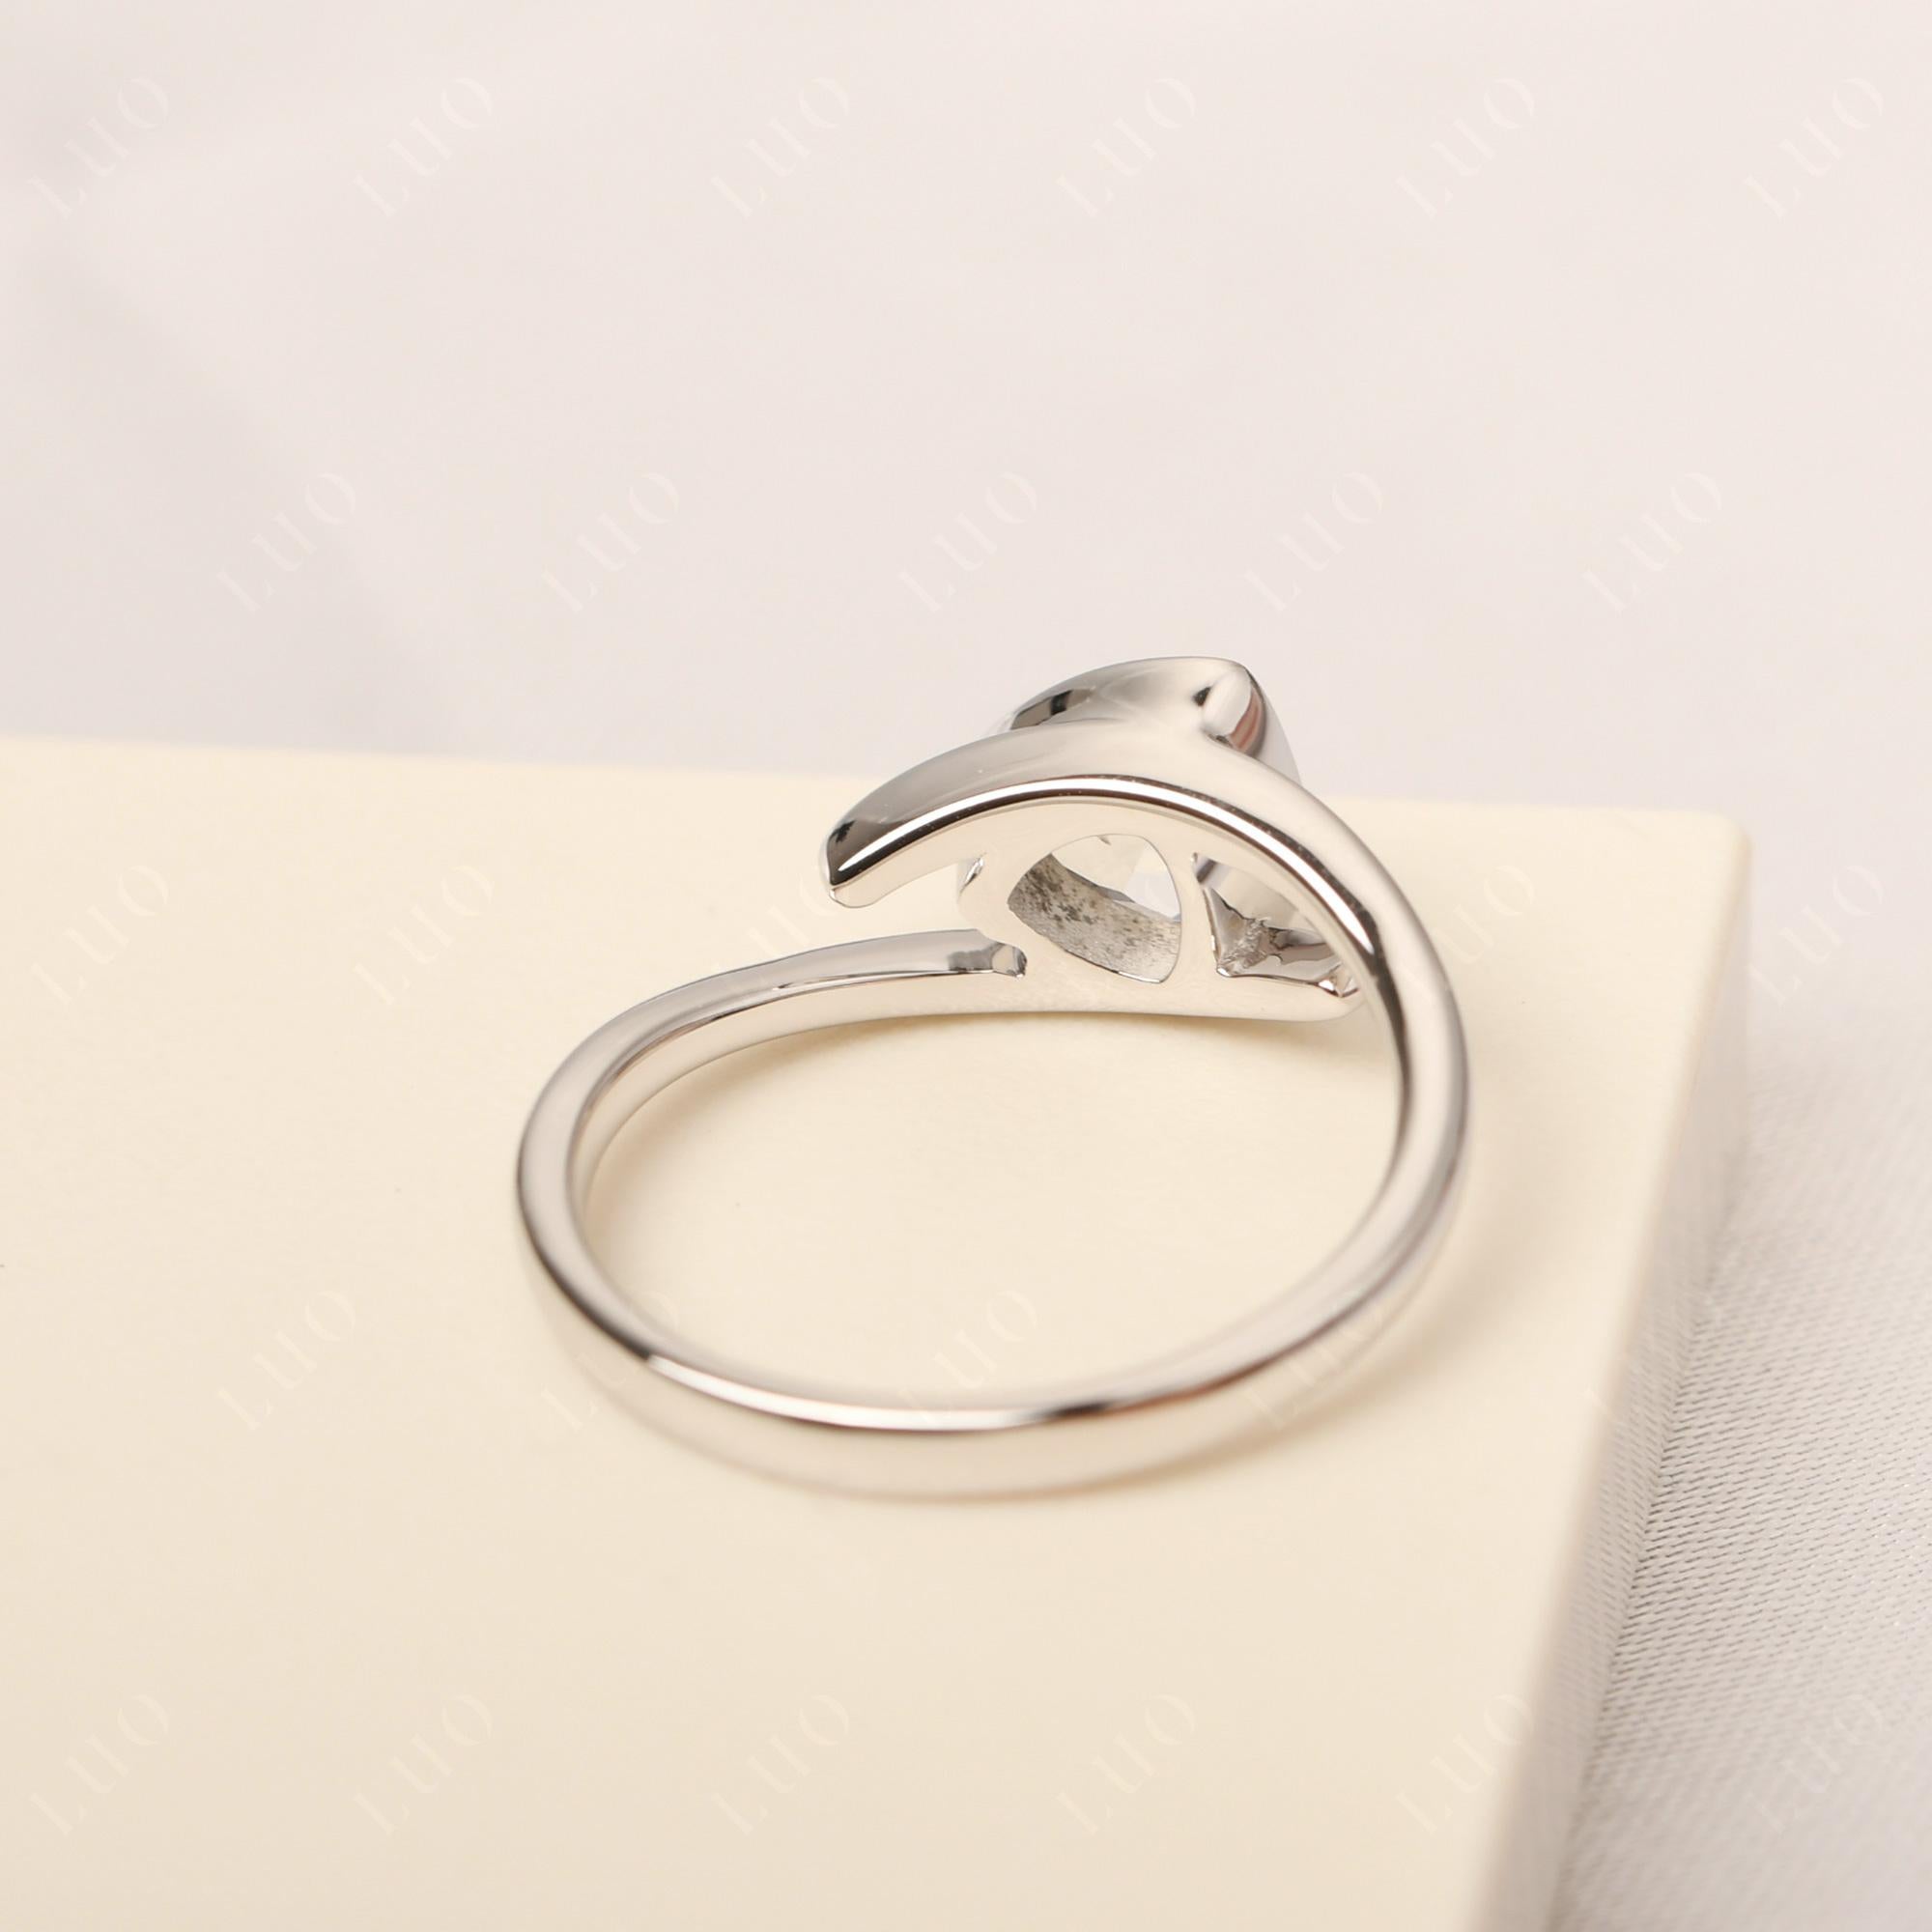 White Topaz Bezel Set Bypass Solitaire Ring - LUO Jewelry